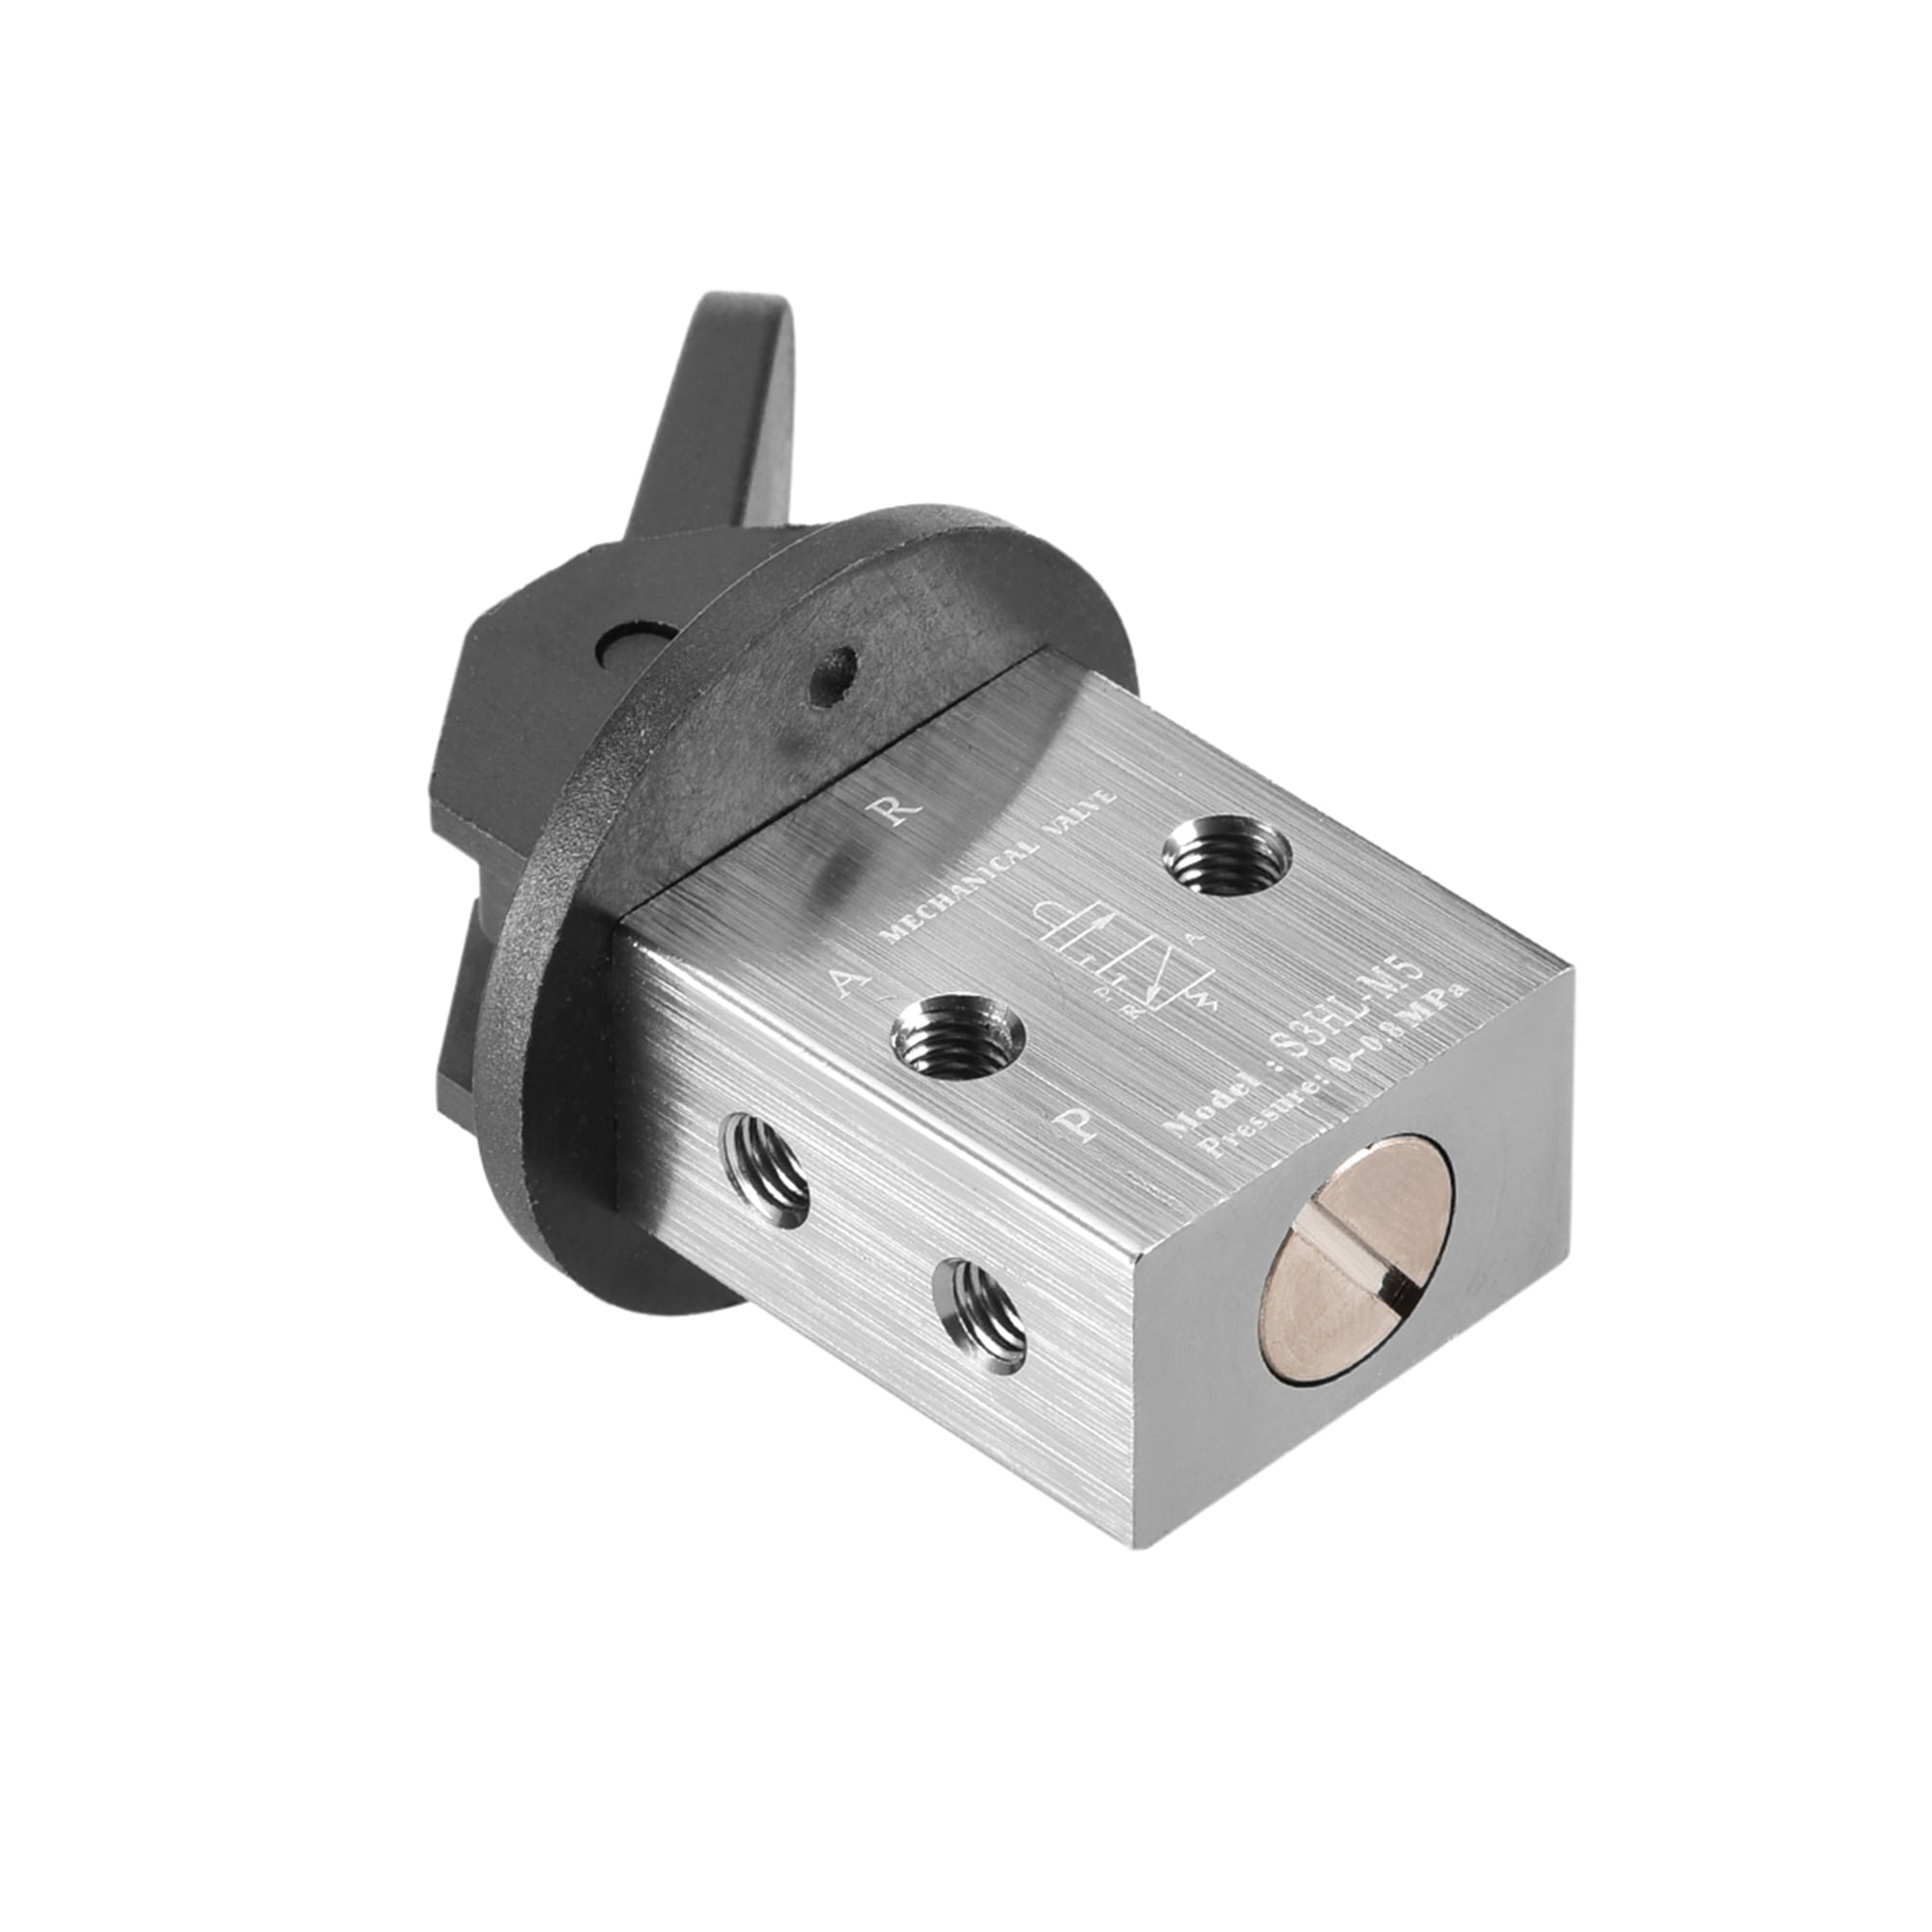 Details about   S3HL-M5 2 Position 3 Way M5 Manual Hand Pull Pneumatic Solenoid Mechanical Valve 